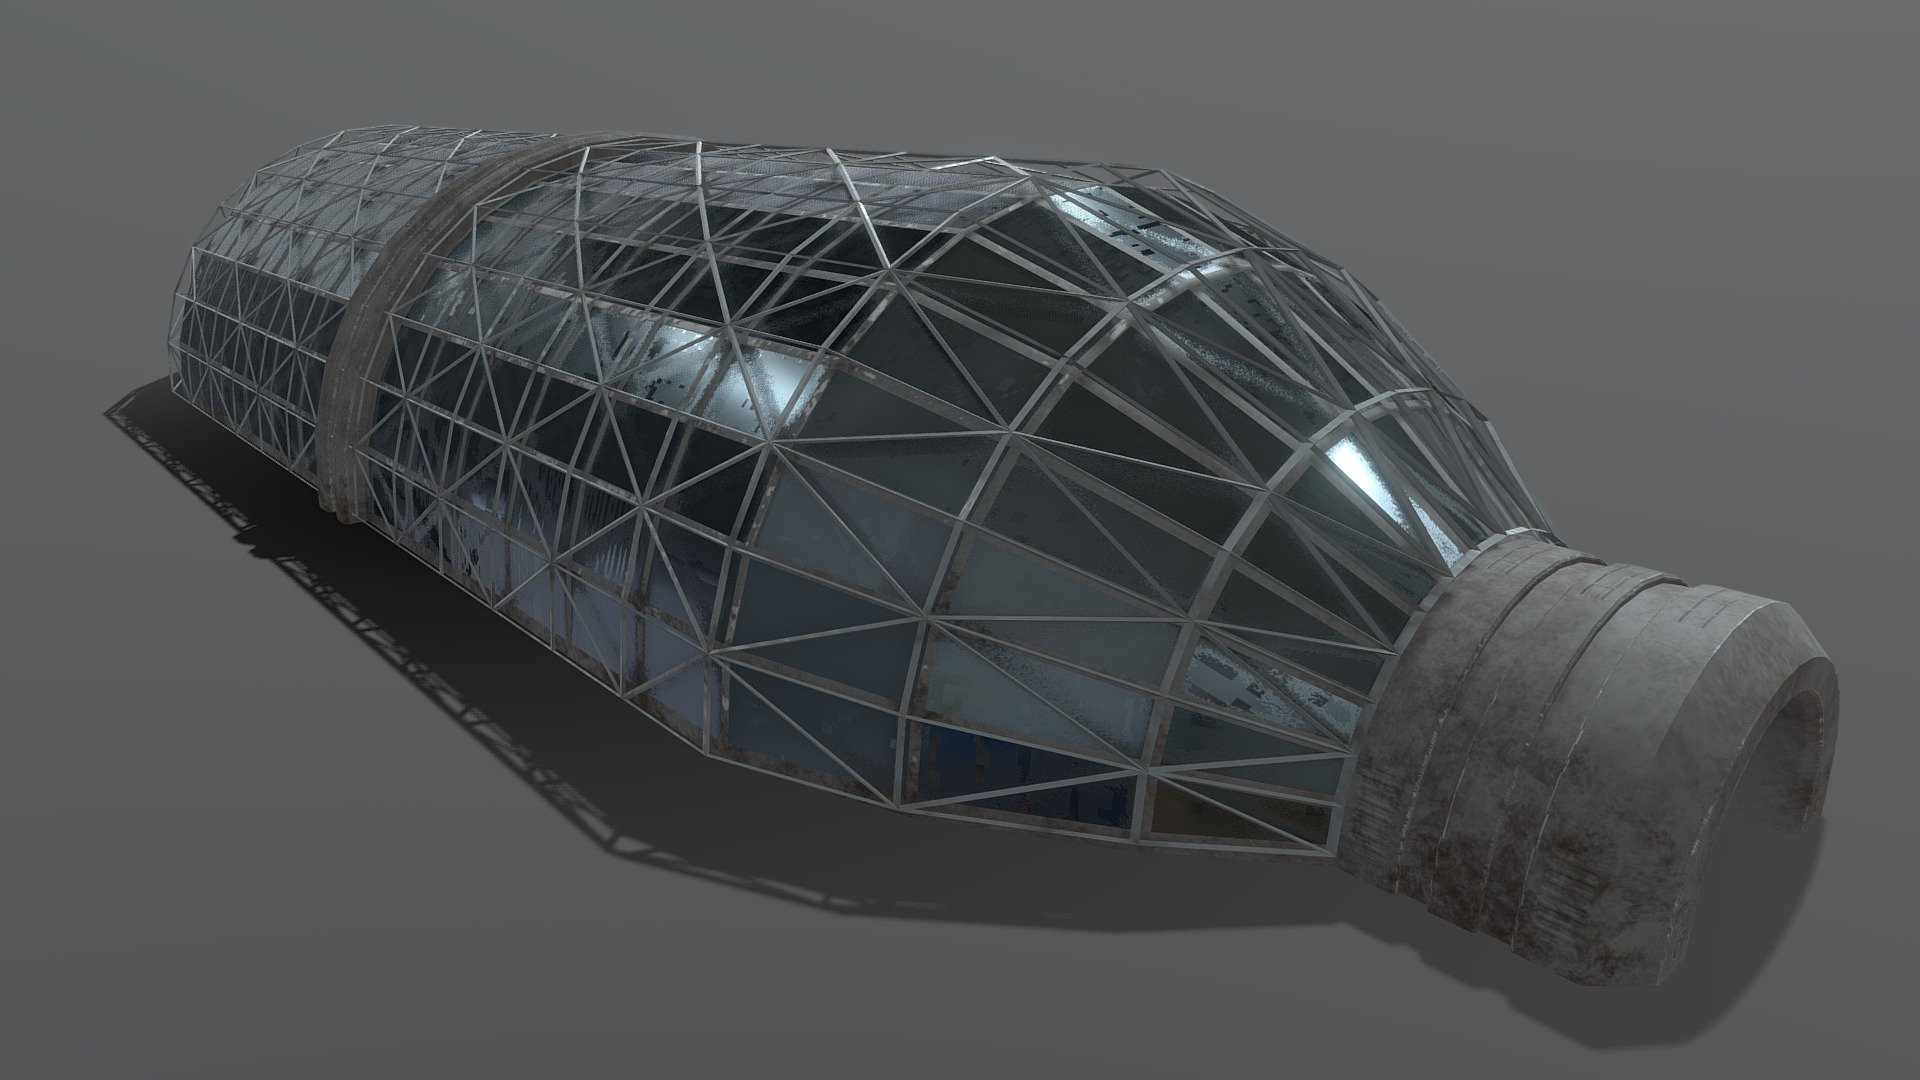 SCI-FI BIO-ZONE HANGER

Modelled in Blender 2.93

Textured with Substance Painter 2

Fbx &amp; Obj + All Texture Files provided

All Modifiers Closed

4K Maps:

BaseColor

Metallic

Roughness

Normal

Height Maps also provided should you wish to use them

Polycount:

V: 5,552

F: 8,342

T: 16,692

Scale: 1.000

Height: 7.65m

Width: 14.9m

Depth: 50.0m

Origin Point Of Hanger: Centre Of Mass

Nice Asset to add to your Sci-Fi Scene

Please note if you wish to use Blenders EEVEE Render Engine:

You may need to go into the Render Properties Tab - Performance - Enable High Quality Normals

Hope you like the Model 

Any queries please do get in touch

Thanks for your interest &amp; Support!

MagicCGIStudios - Sci-Fi Bio Zone Hanger - 3D model by MagicCGIStudios 3d model